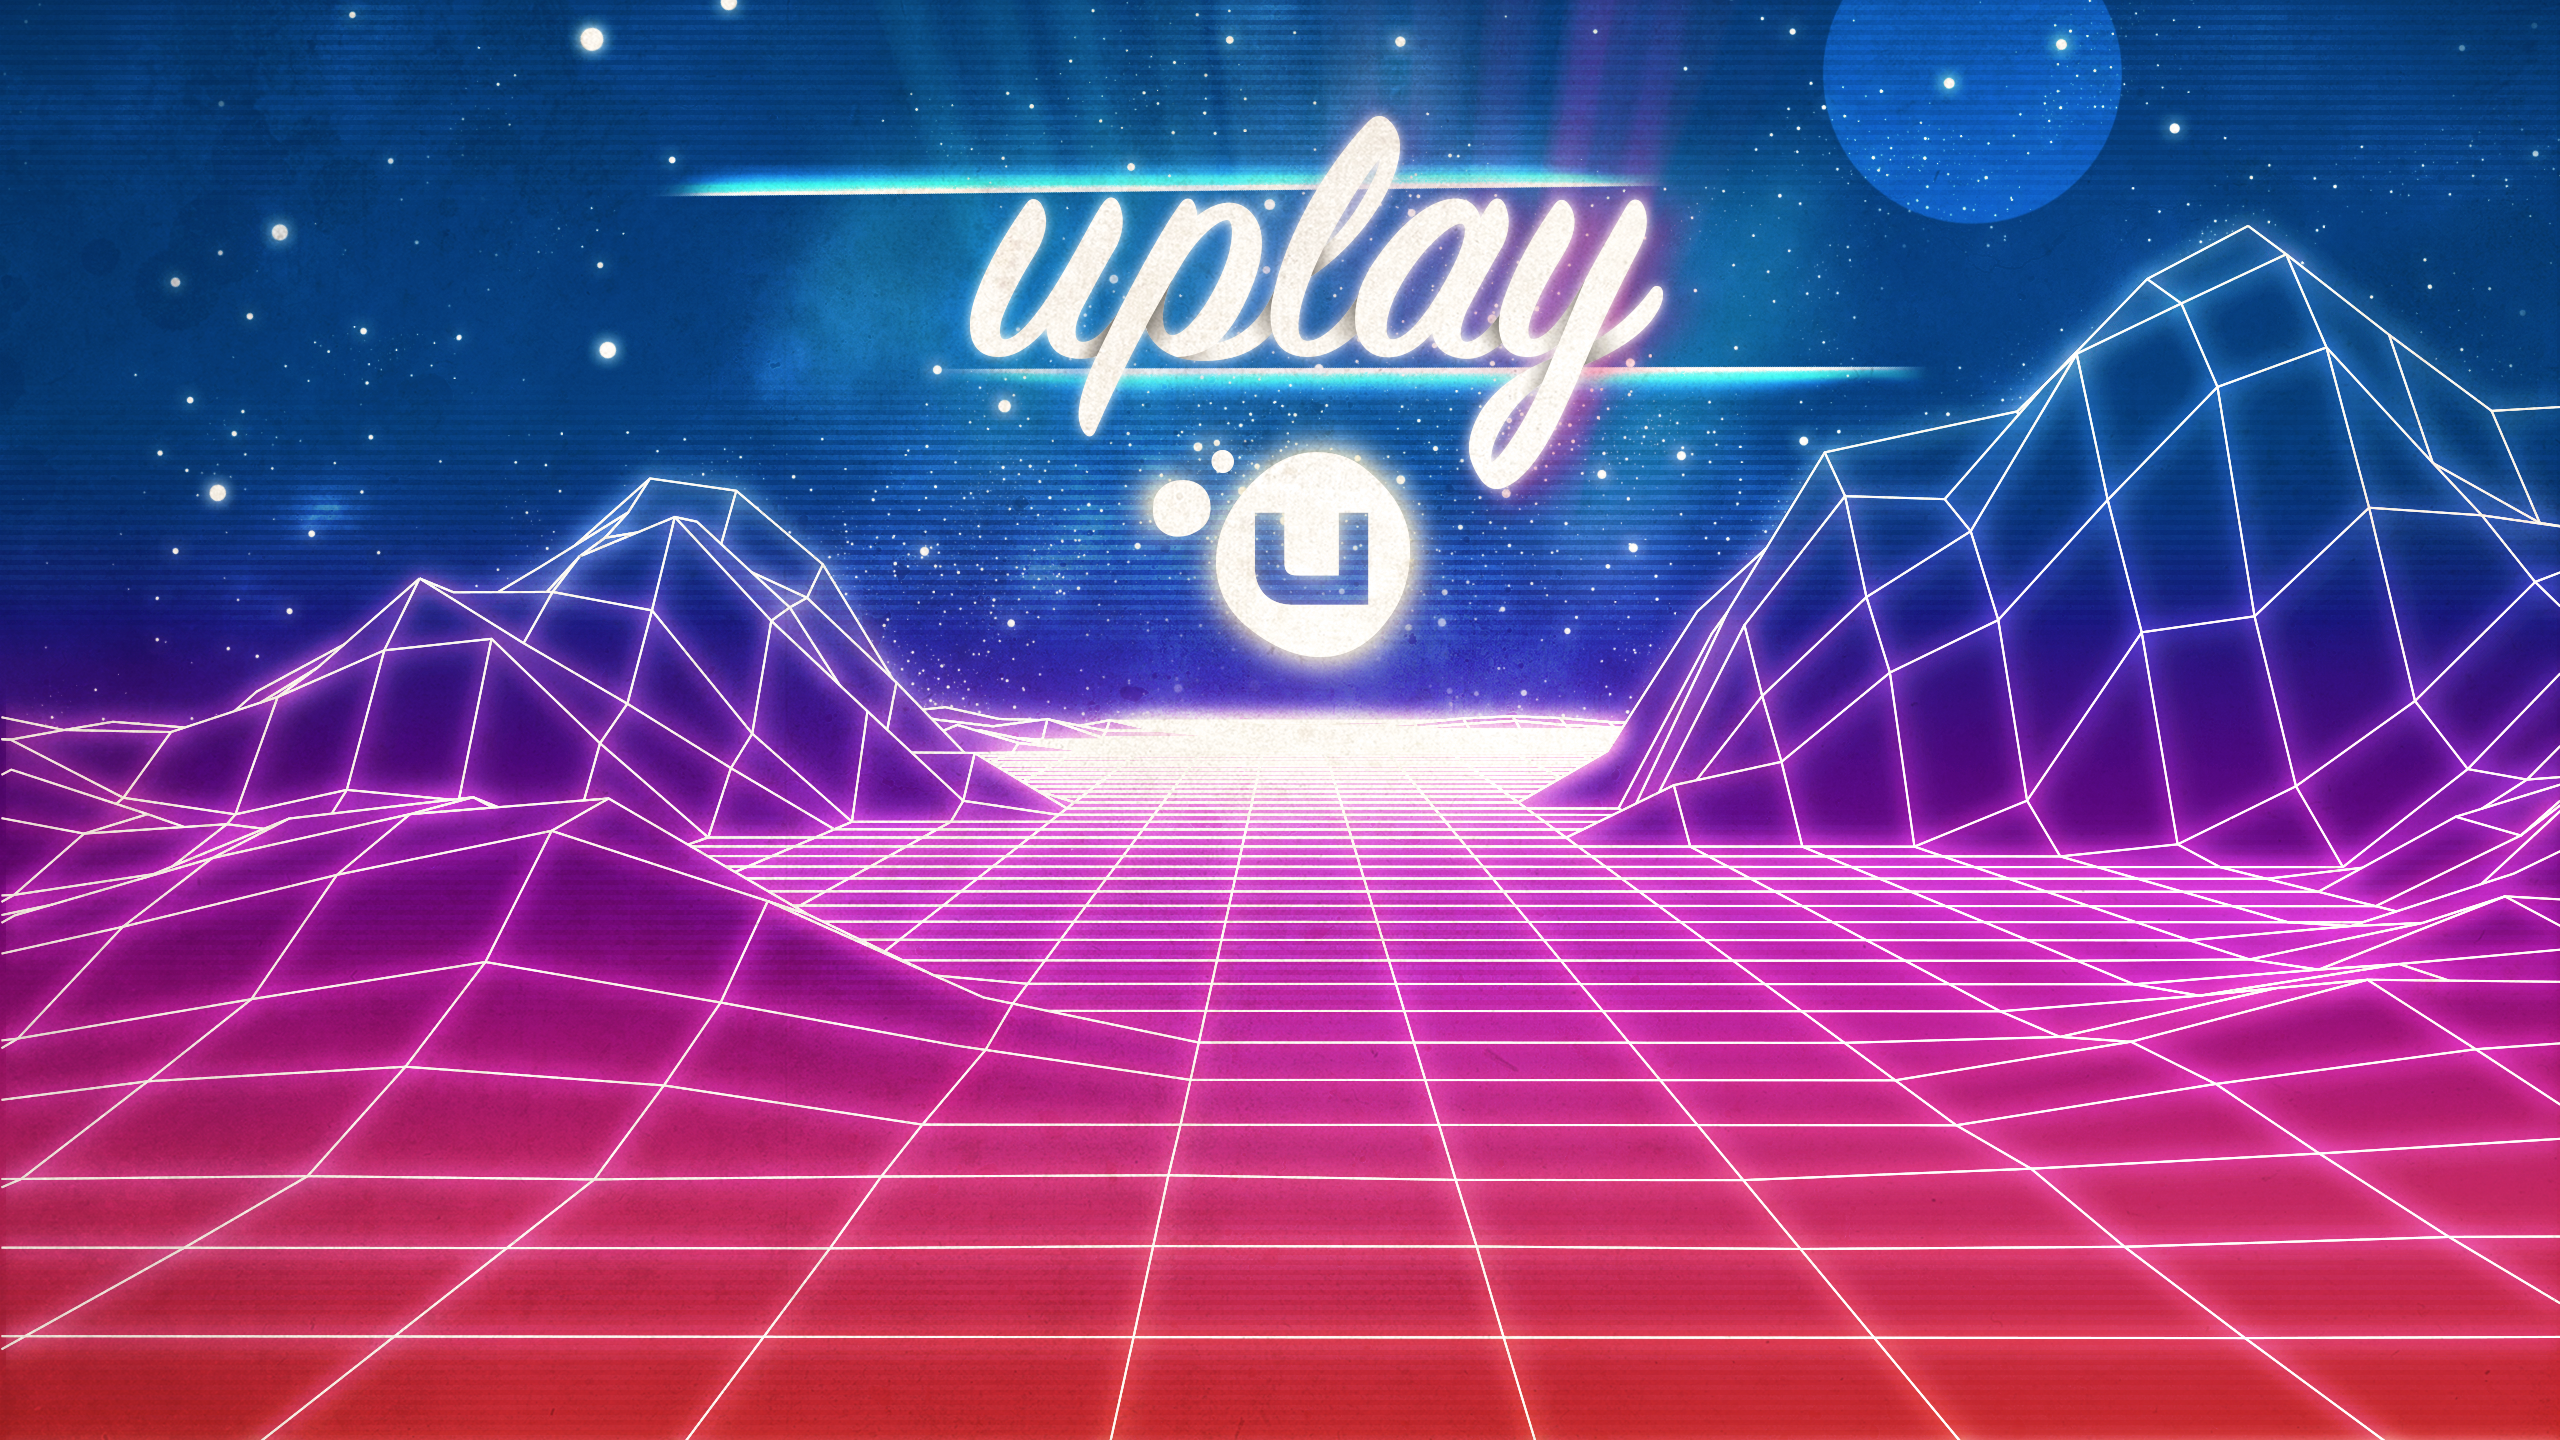 Uplay Abstract Vaporwave 2560x1440